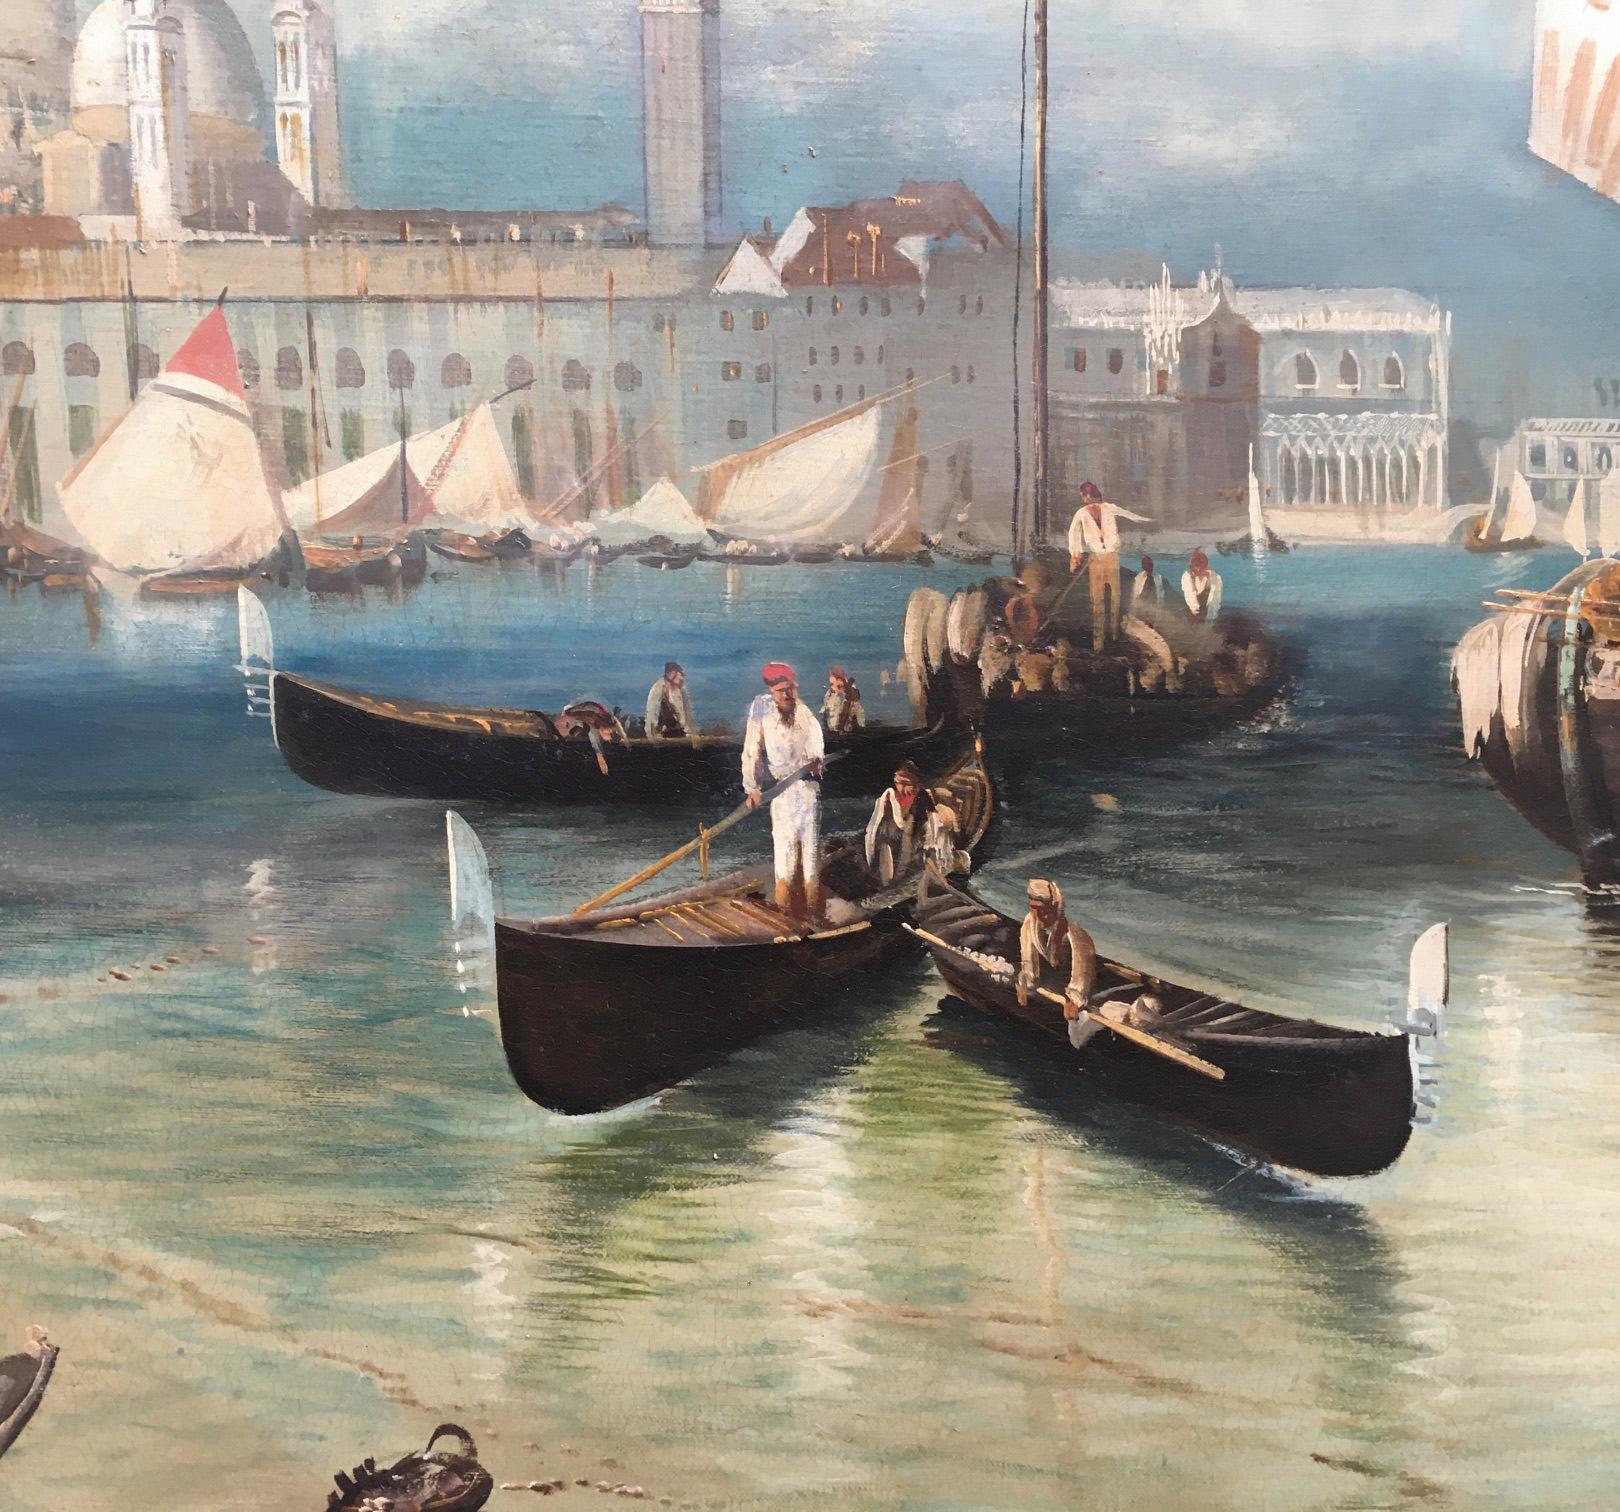 Venice - Giancarlo Gorini Italia 2004 - Oil on canvas cm.80x120 
Giancarlo Gorini's canvas is an extraordinary work of Italian landscape painting. It is inspired by the landscape painting of Luca Carlevarijs, Canaletto's master, who dominated the